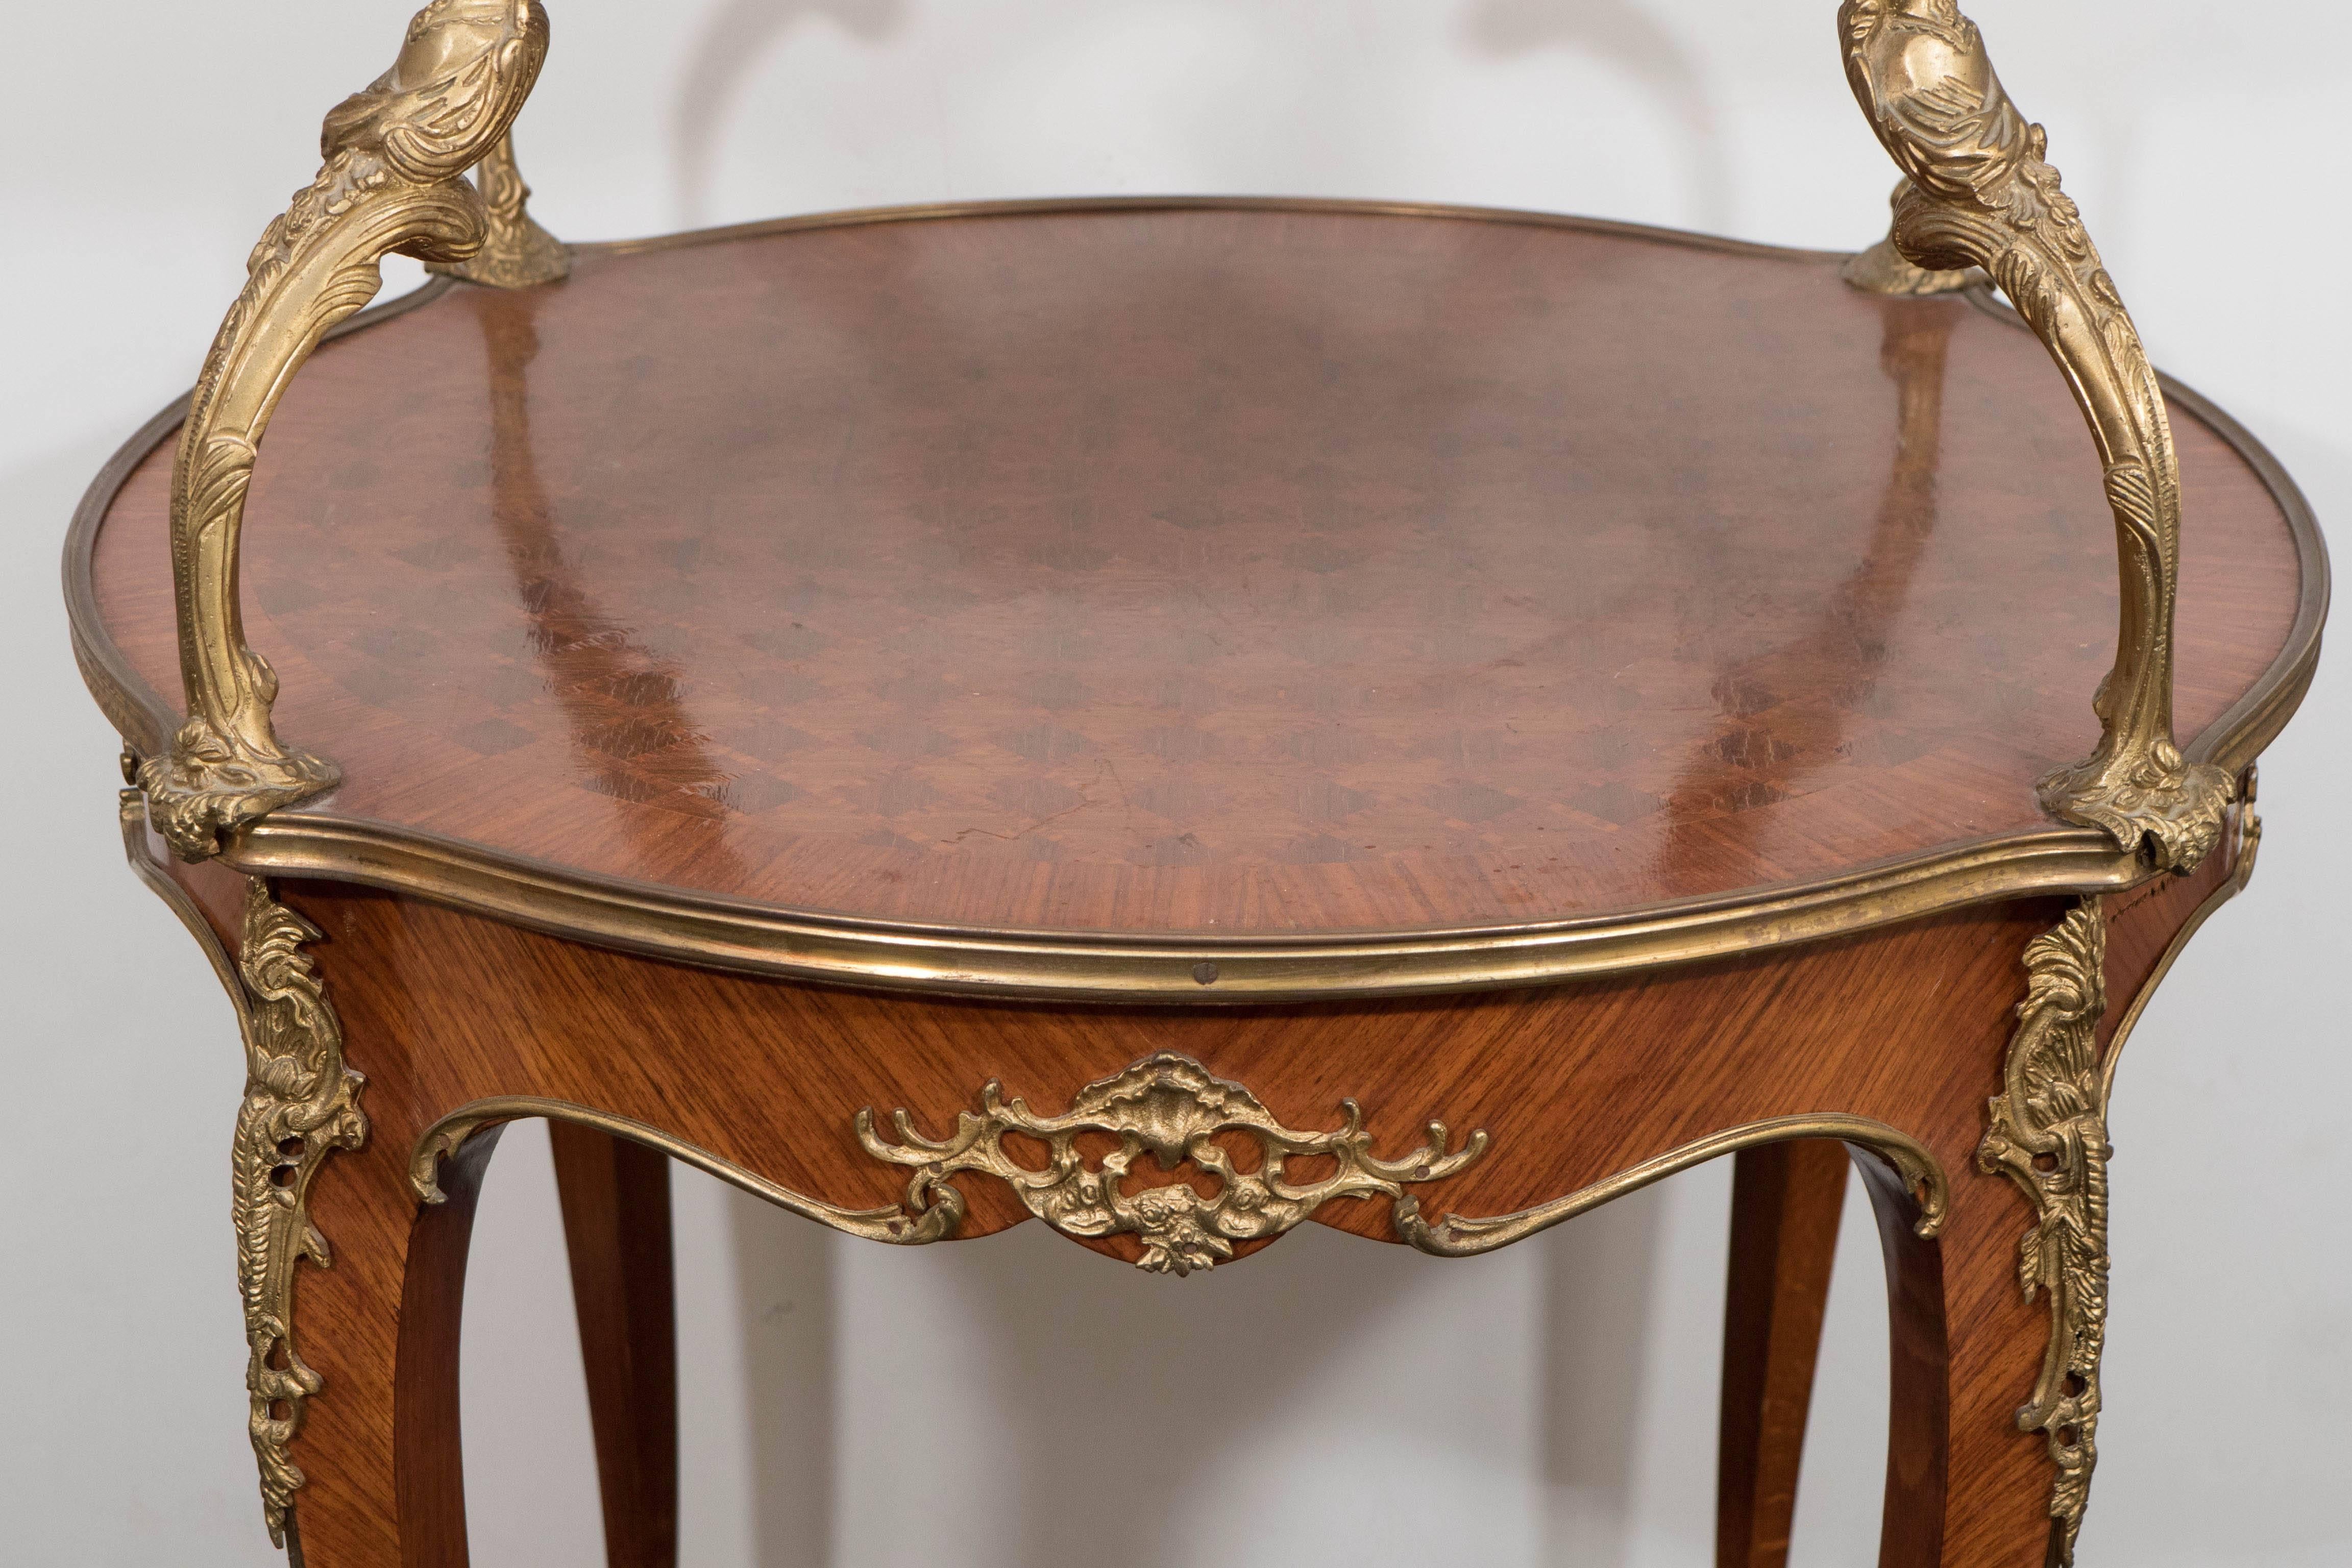 This Louis XV style serving table, produced within the early 20th century period, in the manner of designer and ébéniste François Linke, includes two round ogee edge tiers, each with kingwood parquetry tops, mounted with gilt bronze scrolling